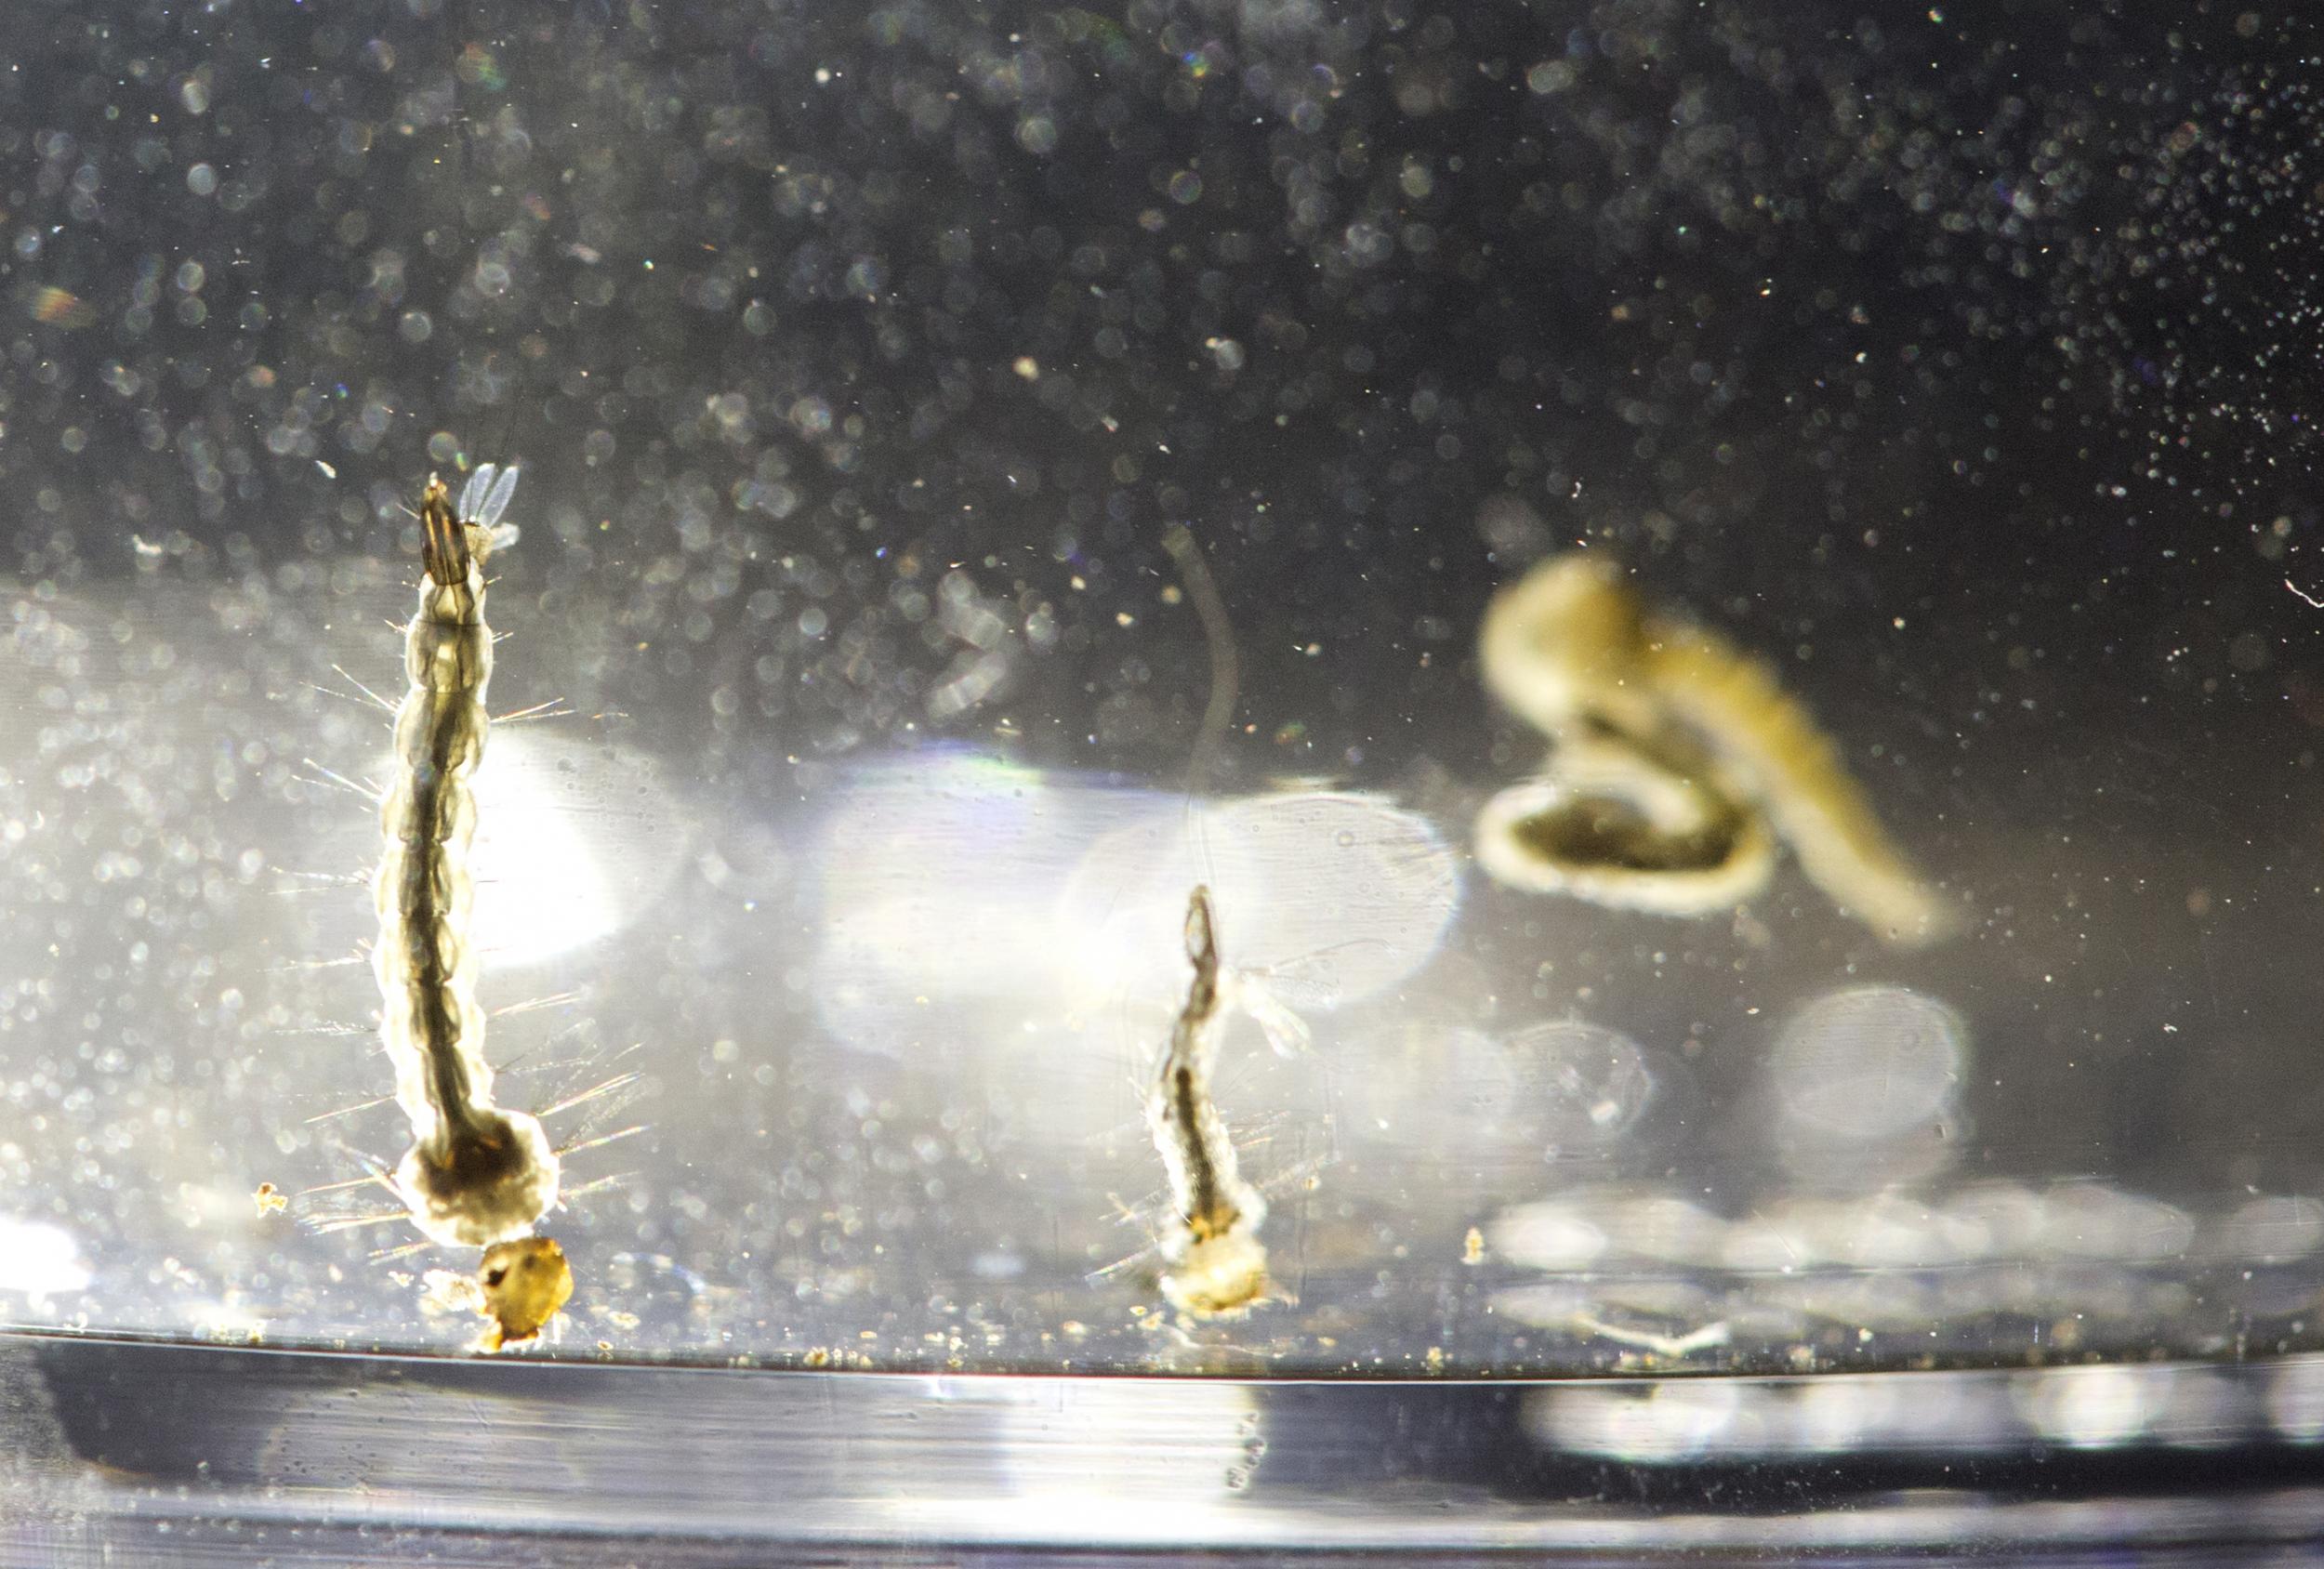 Aedes Aegypti mosquito larvae swim in a container displayed at the Florida Mosquito Control District Office